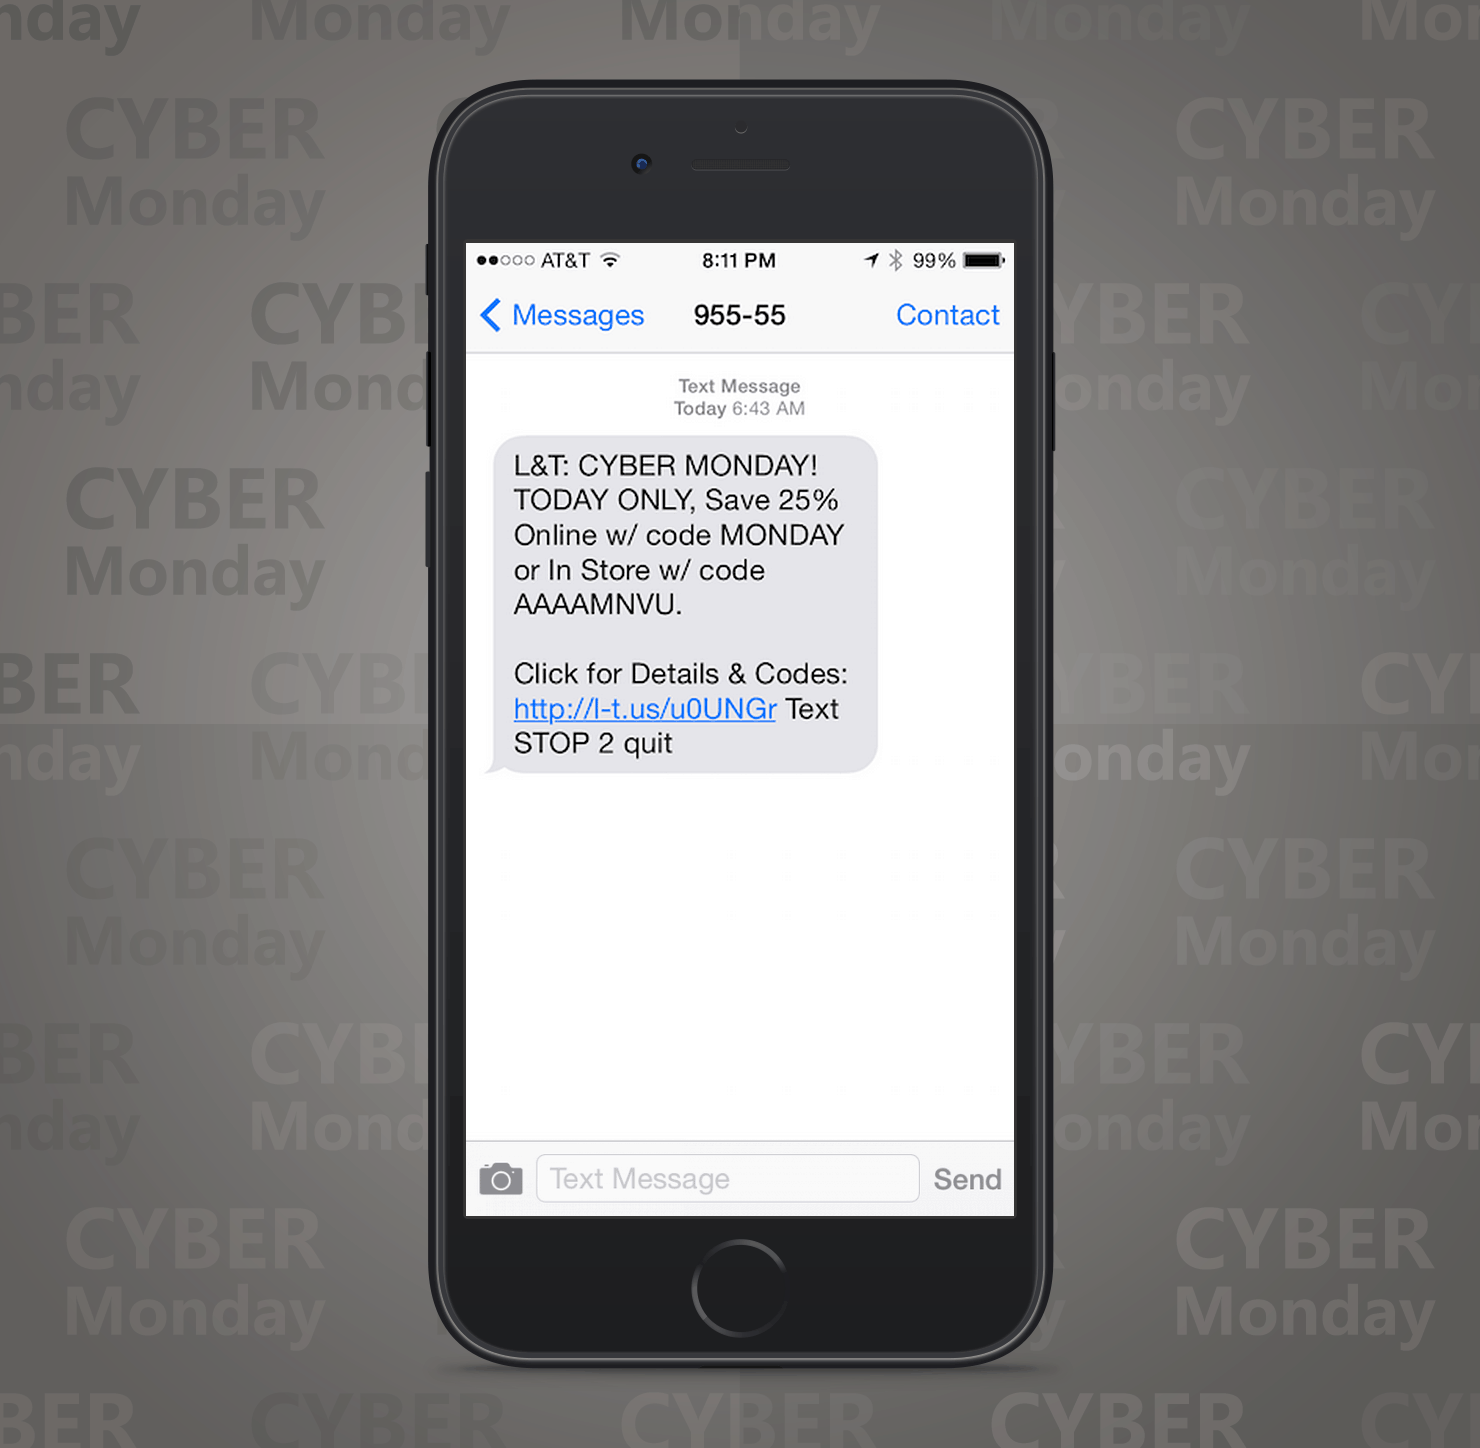 SMS Coupon Example Sent on Cyber Monday From Lord and Taylor Retail Stores to Customers